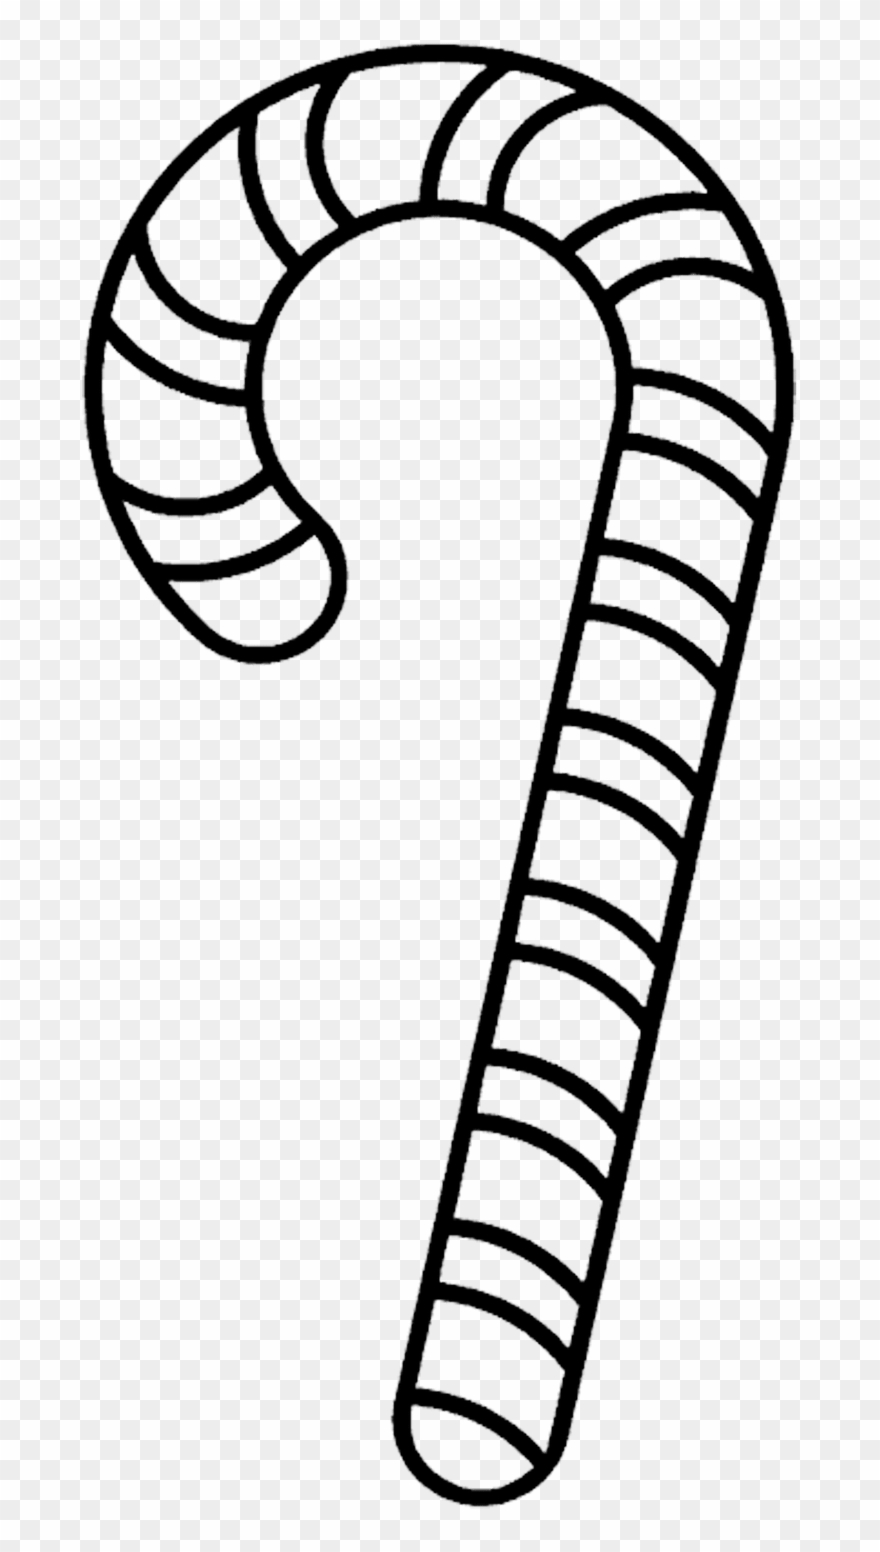 Candy cane clipart.